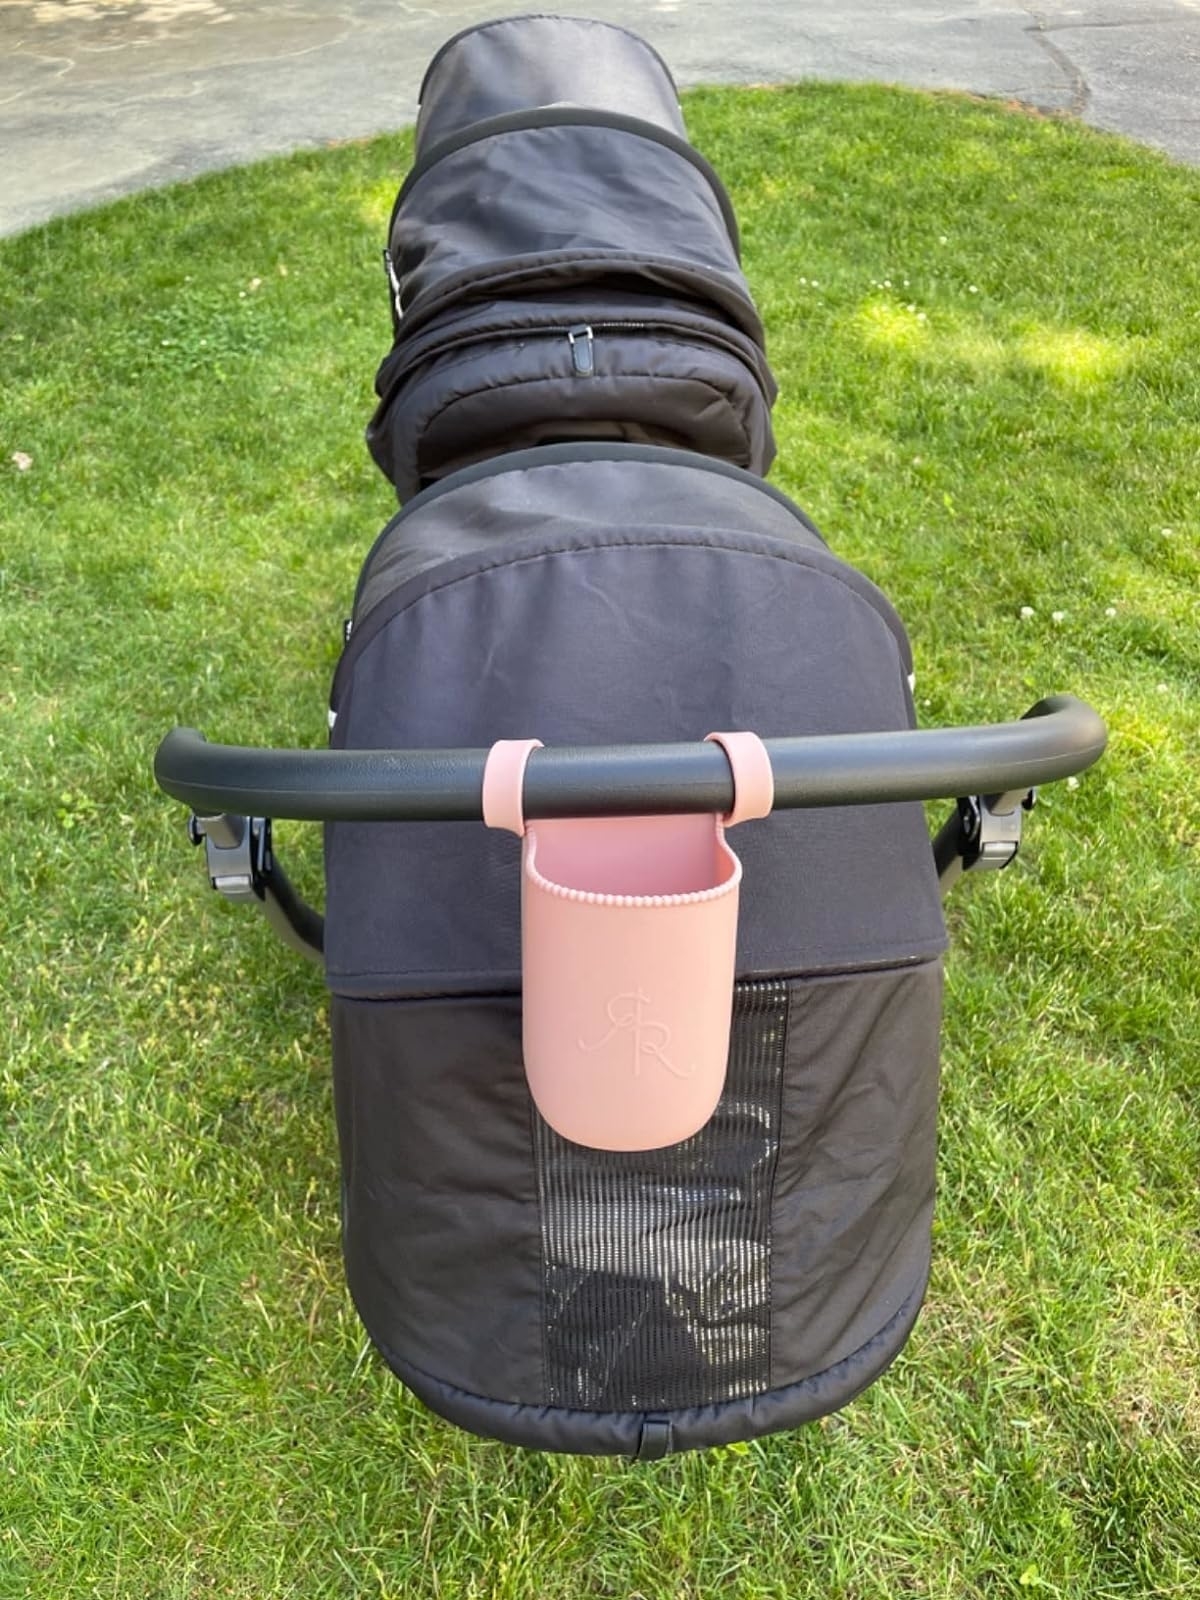 a pink silicone cup holder on a stroller